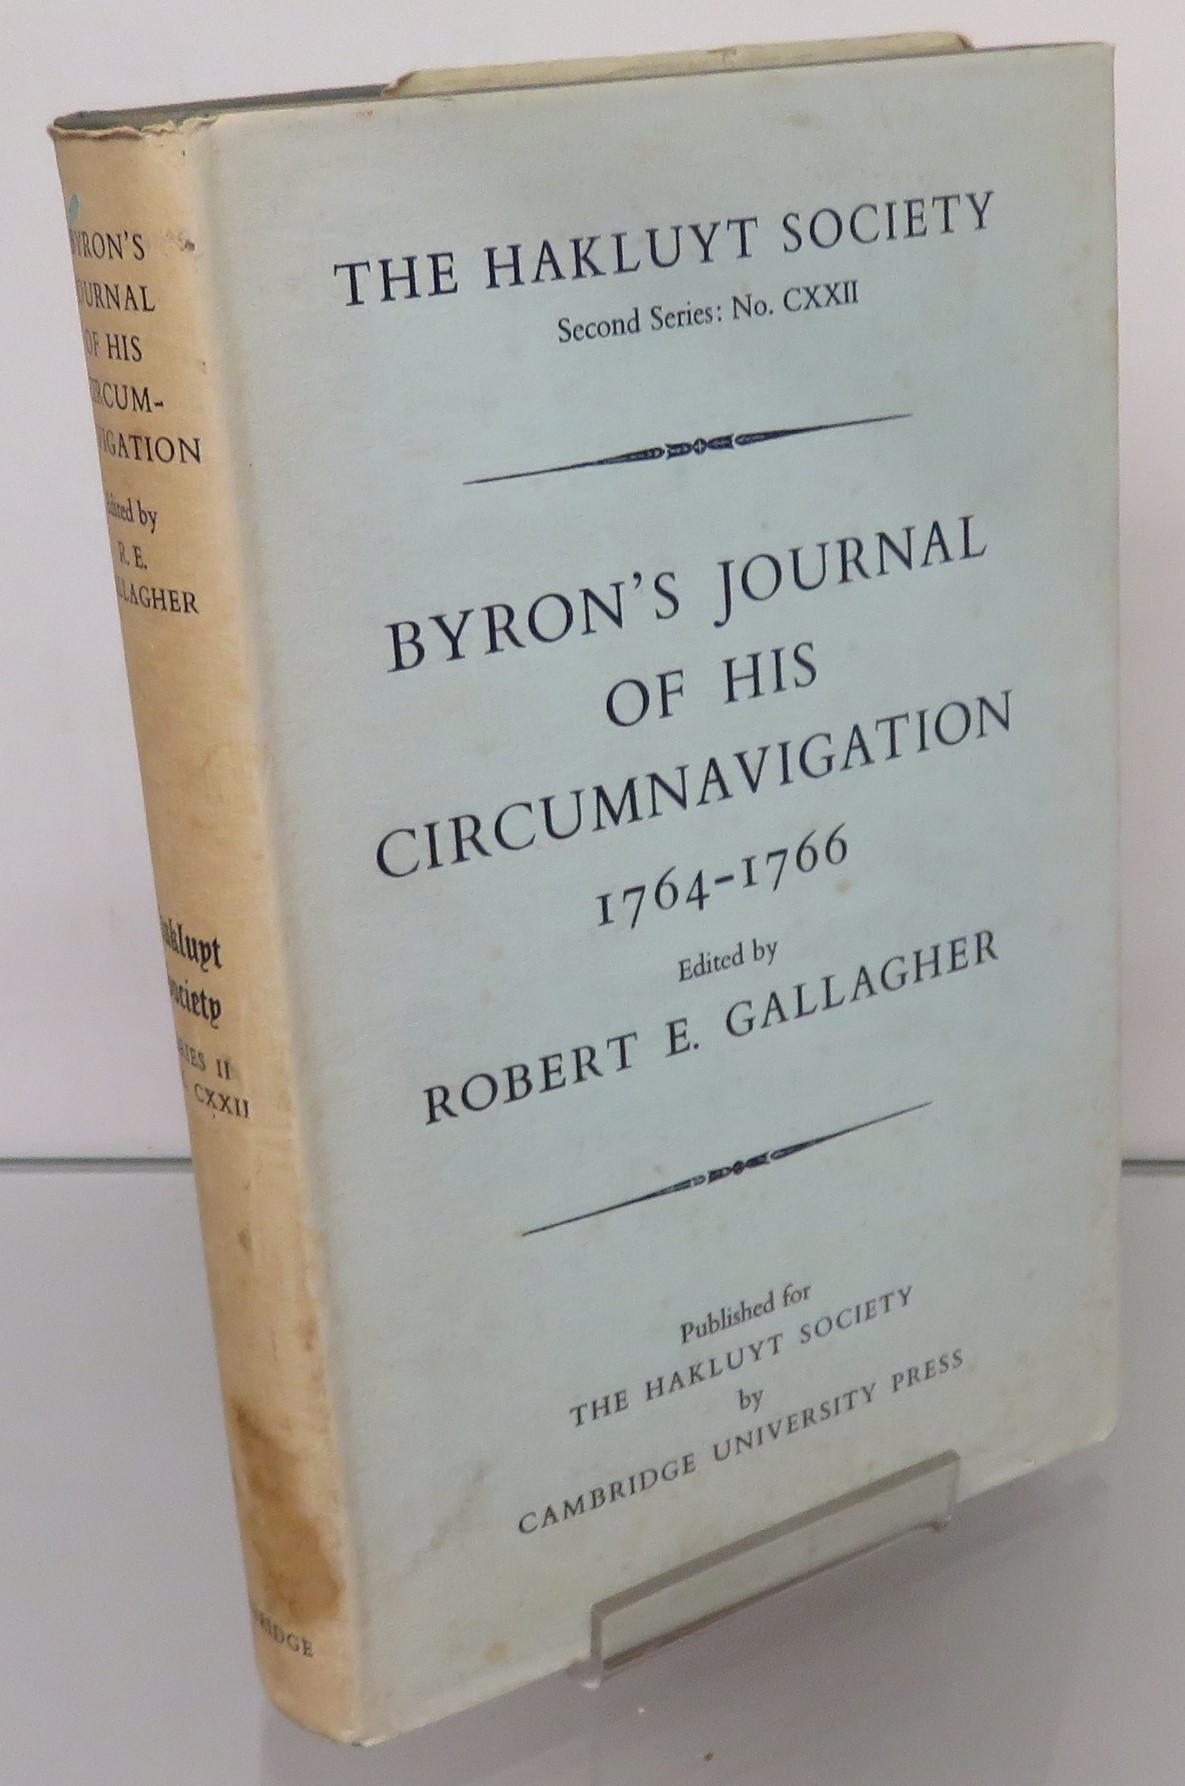 Byron's Journal of his Circumnavigation 1764-1766